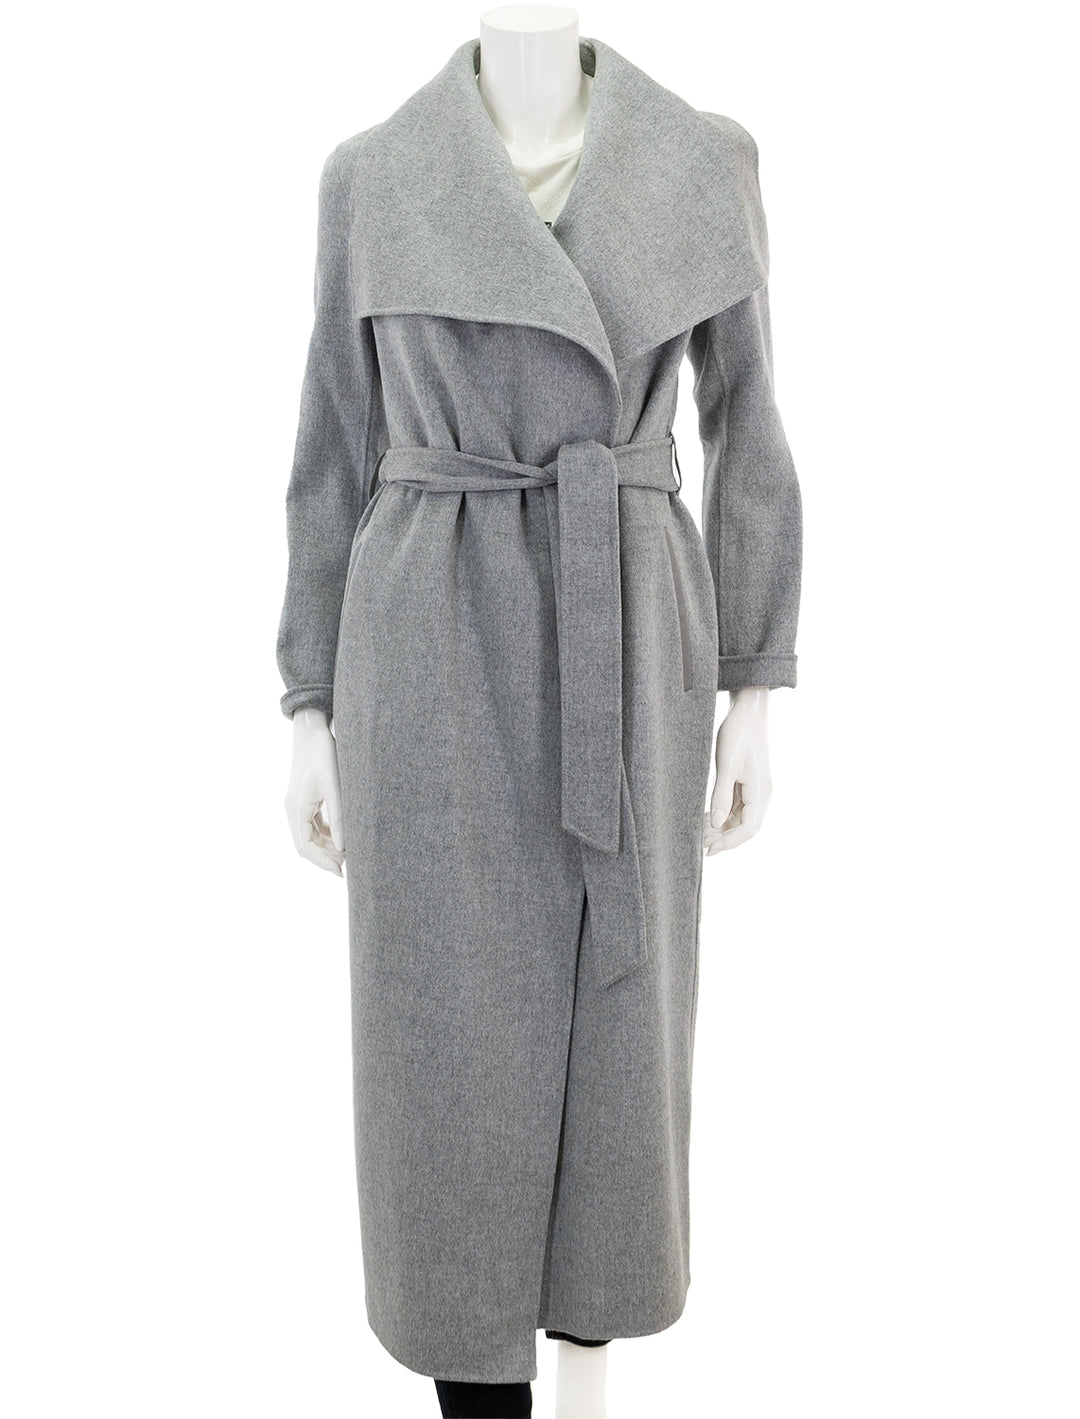 Front view of Mackage's mai in grey melange, tied at the waist.